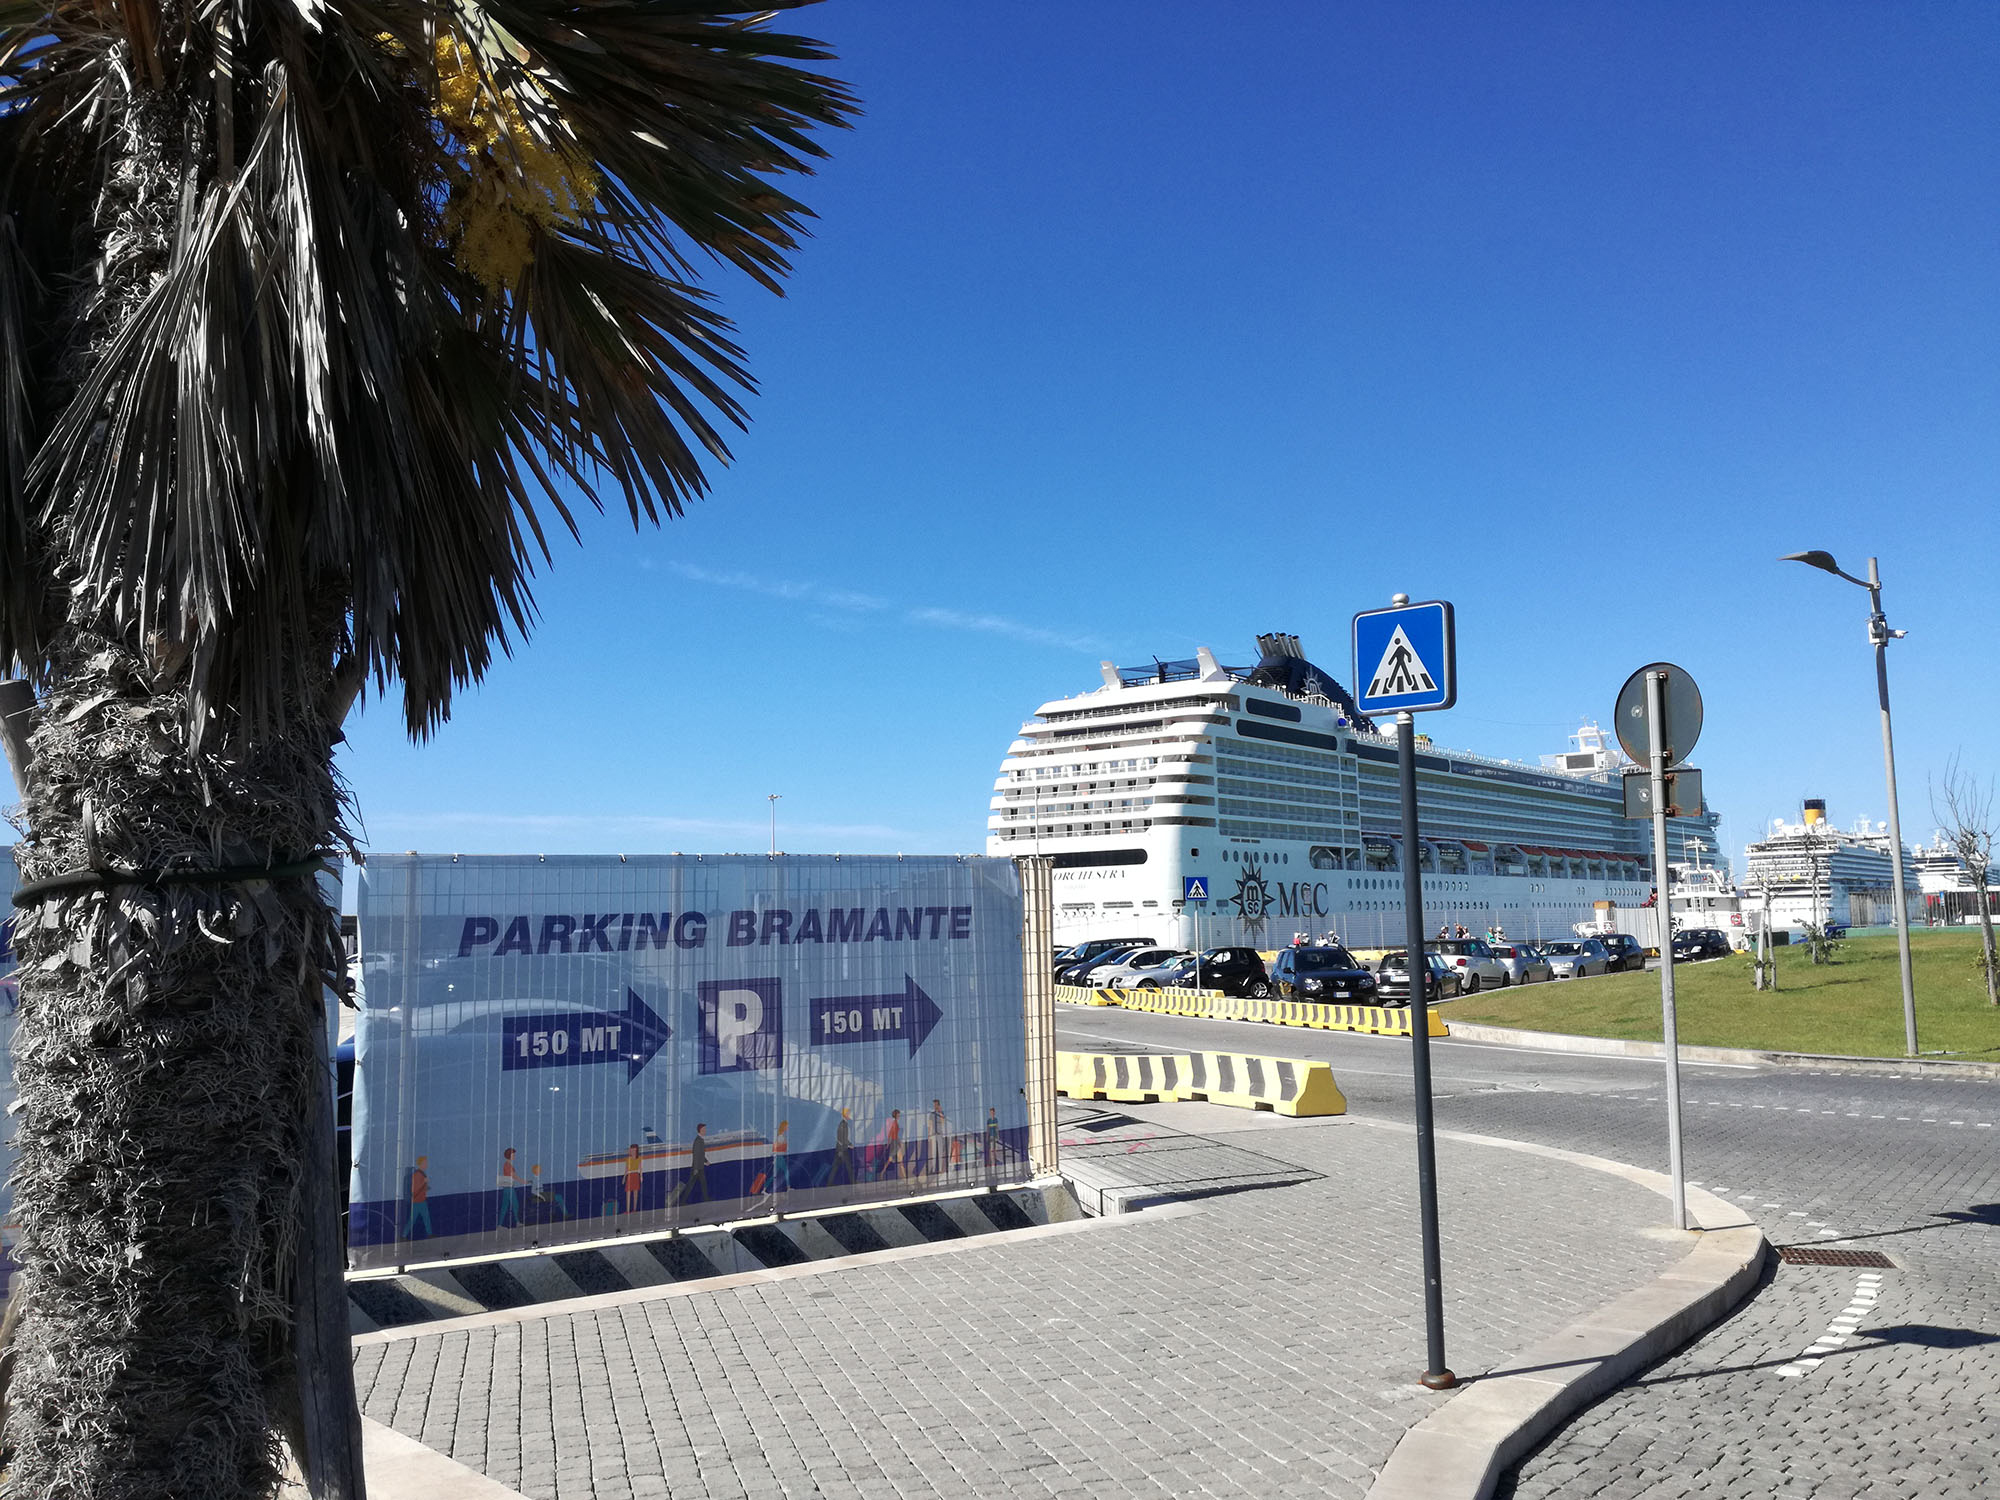 The parking lot Bramante in the port of Civitavecchia, just a few meters away from cruise ships